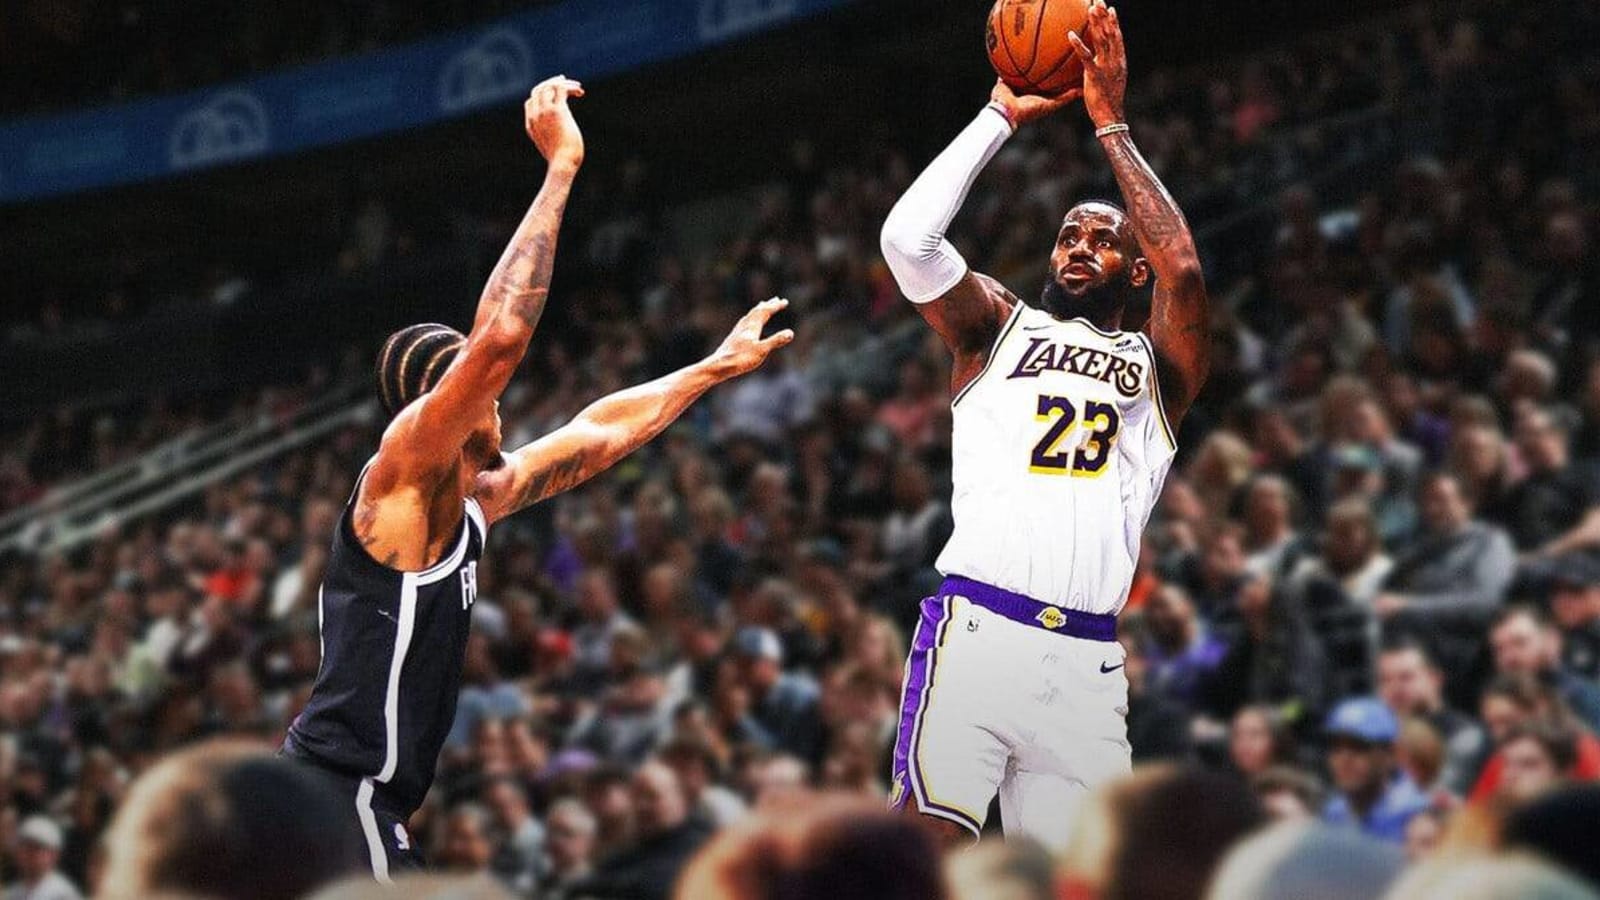 ‘Masterful’ LeBron James’ leads Lakers over Nets with career-best 3-point shooting night